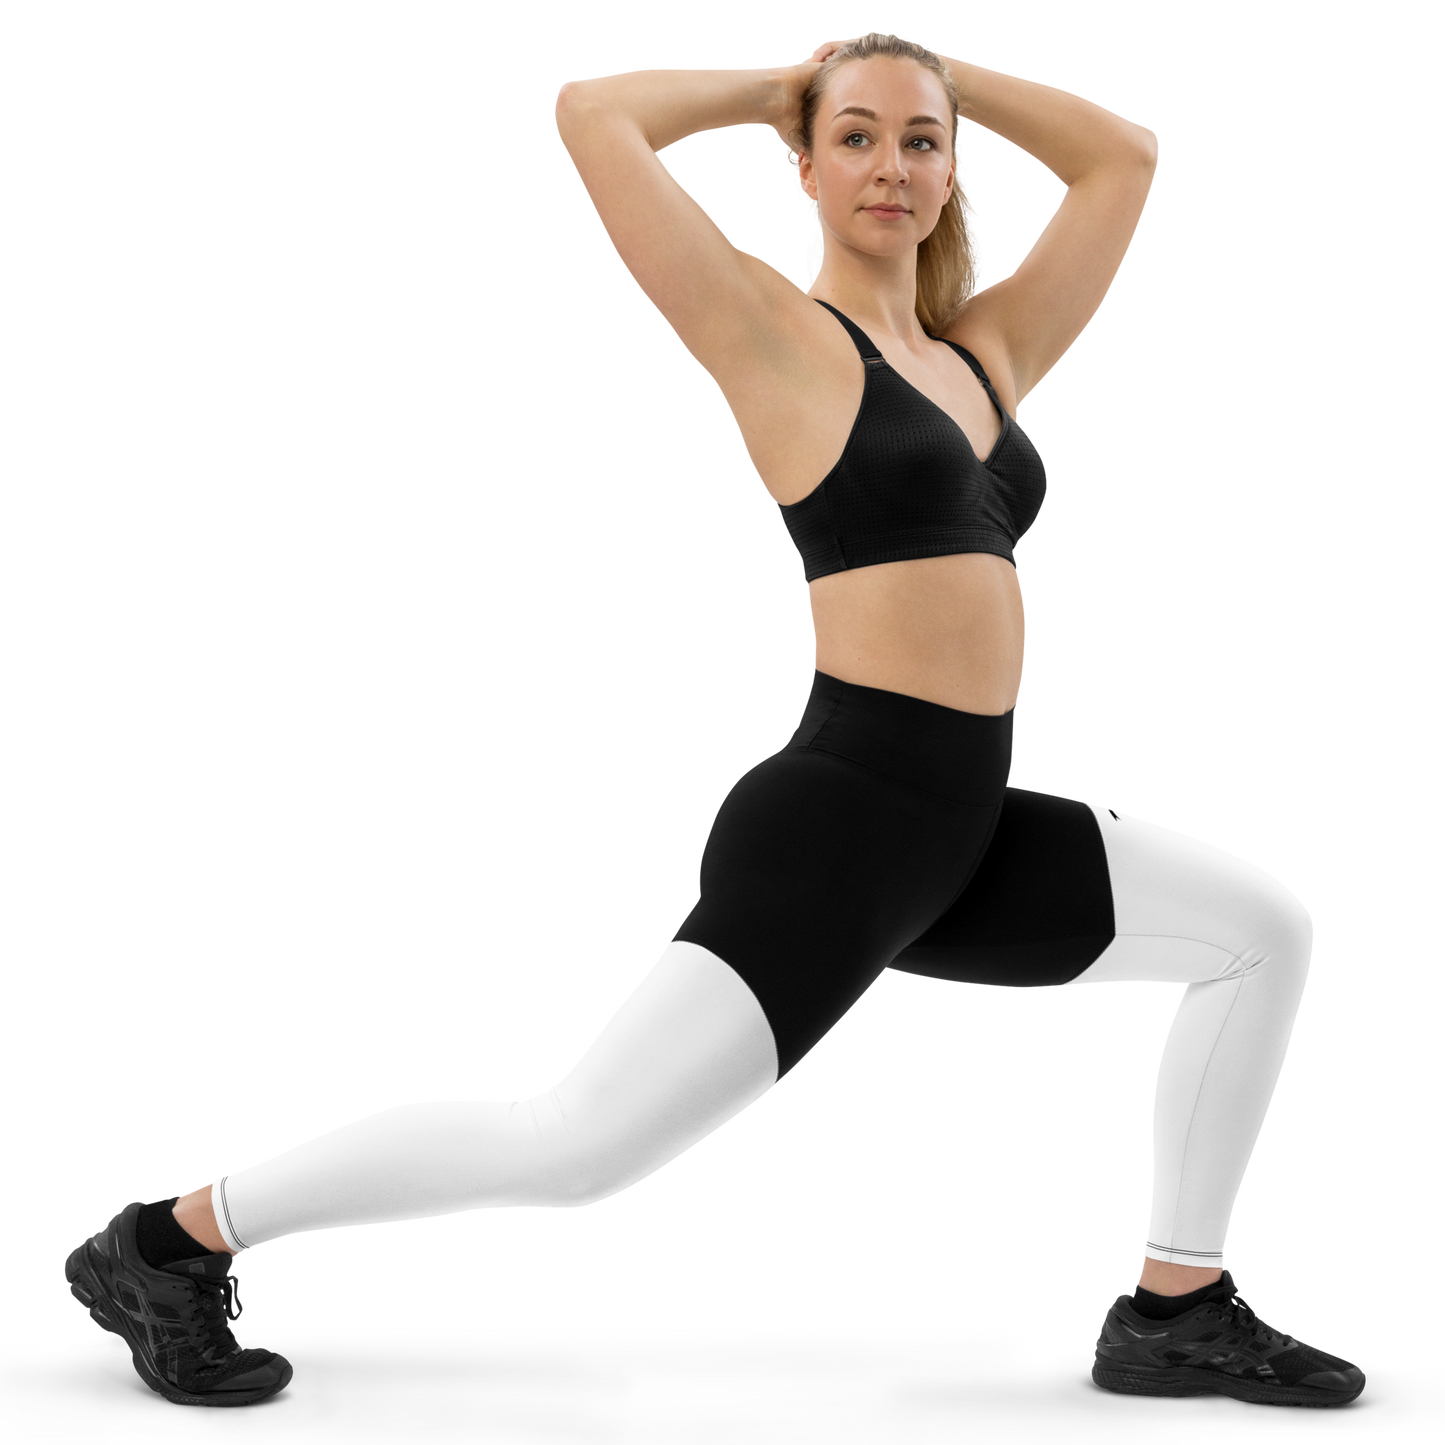 Sports Leggings with pocket